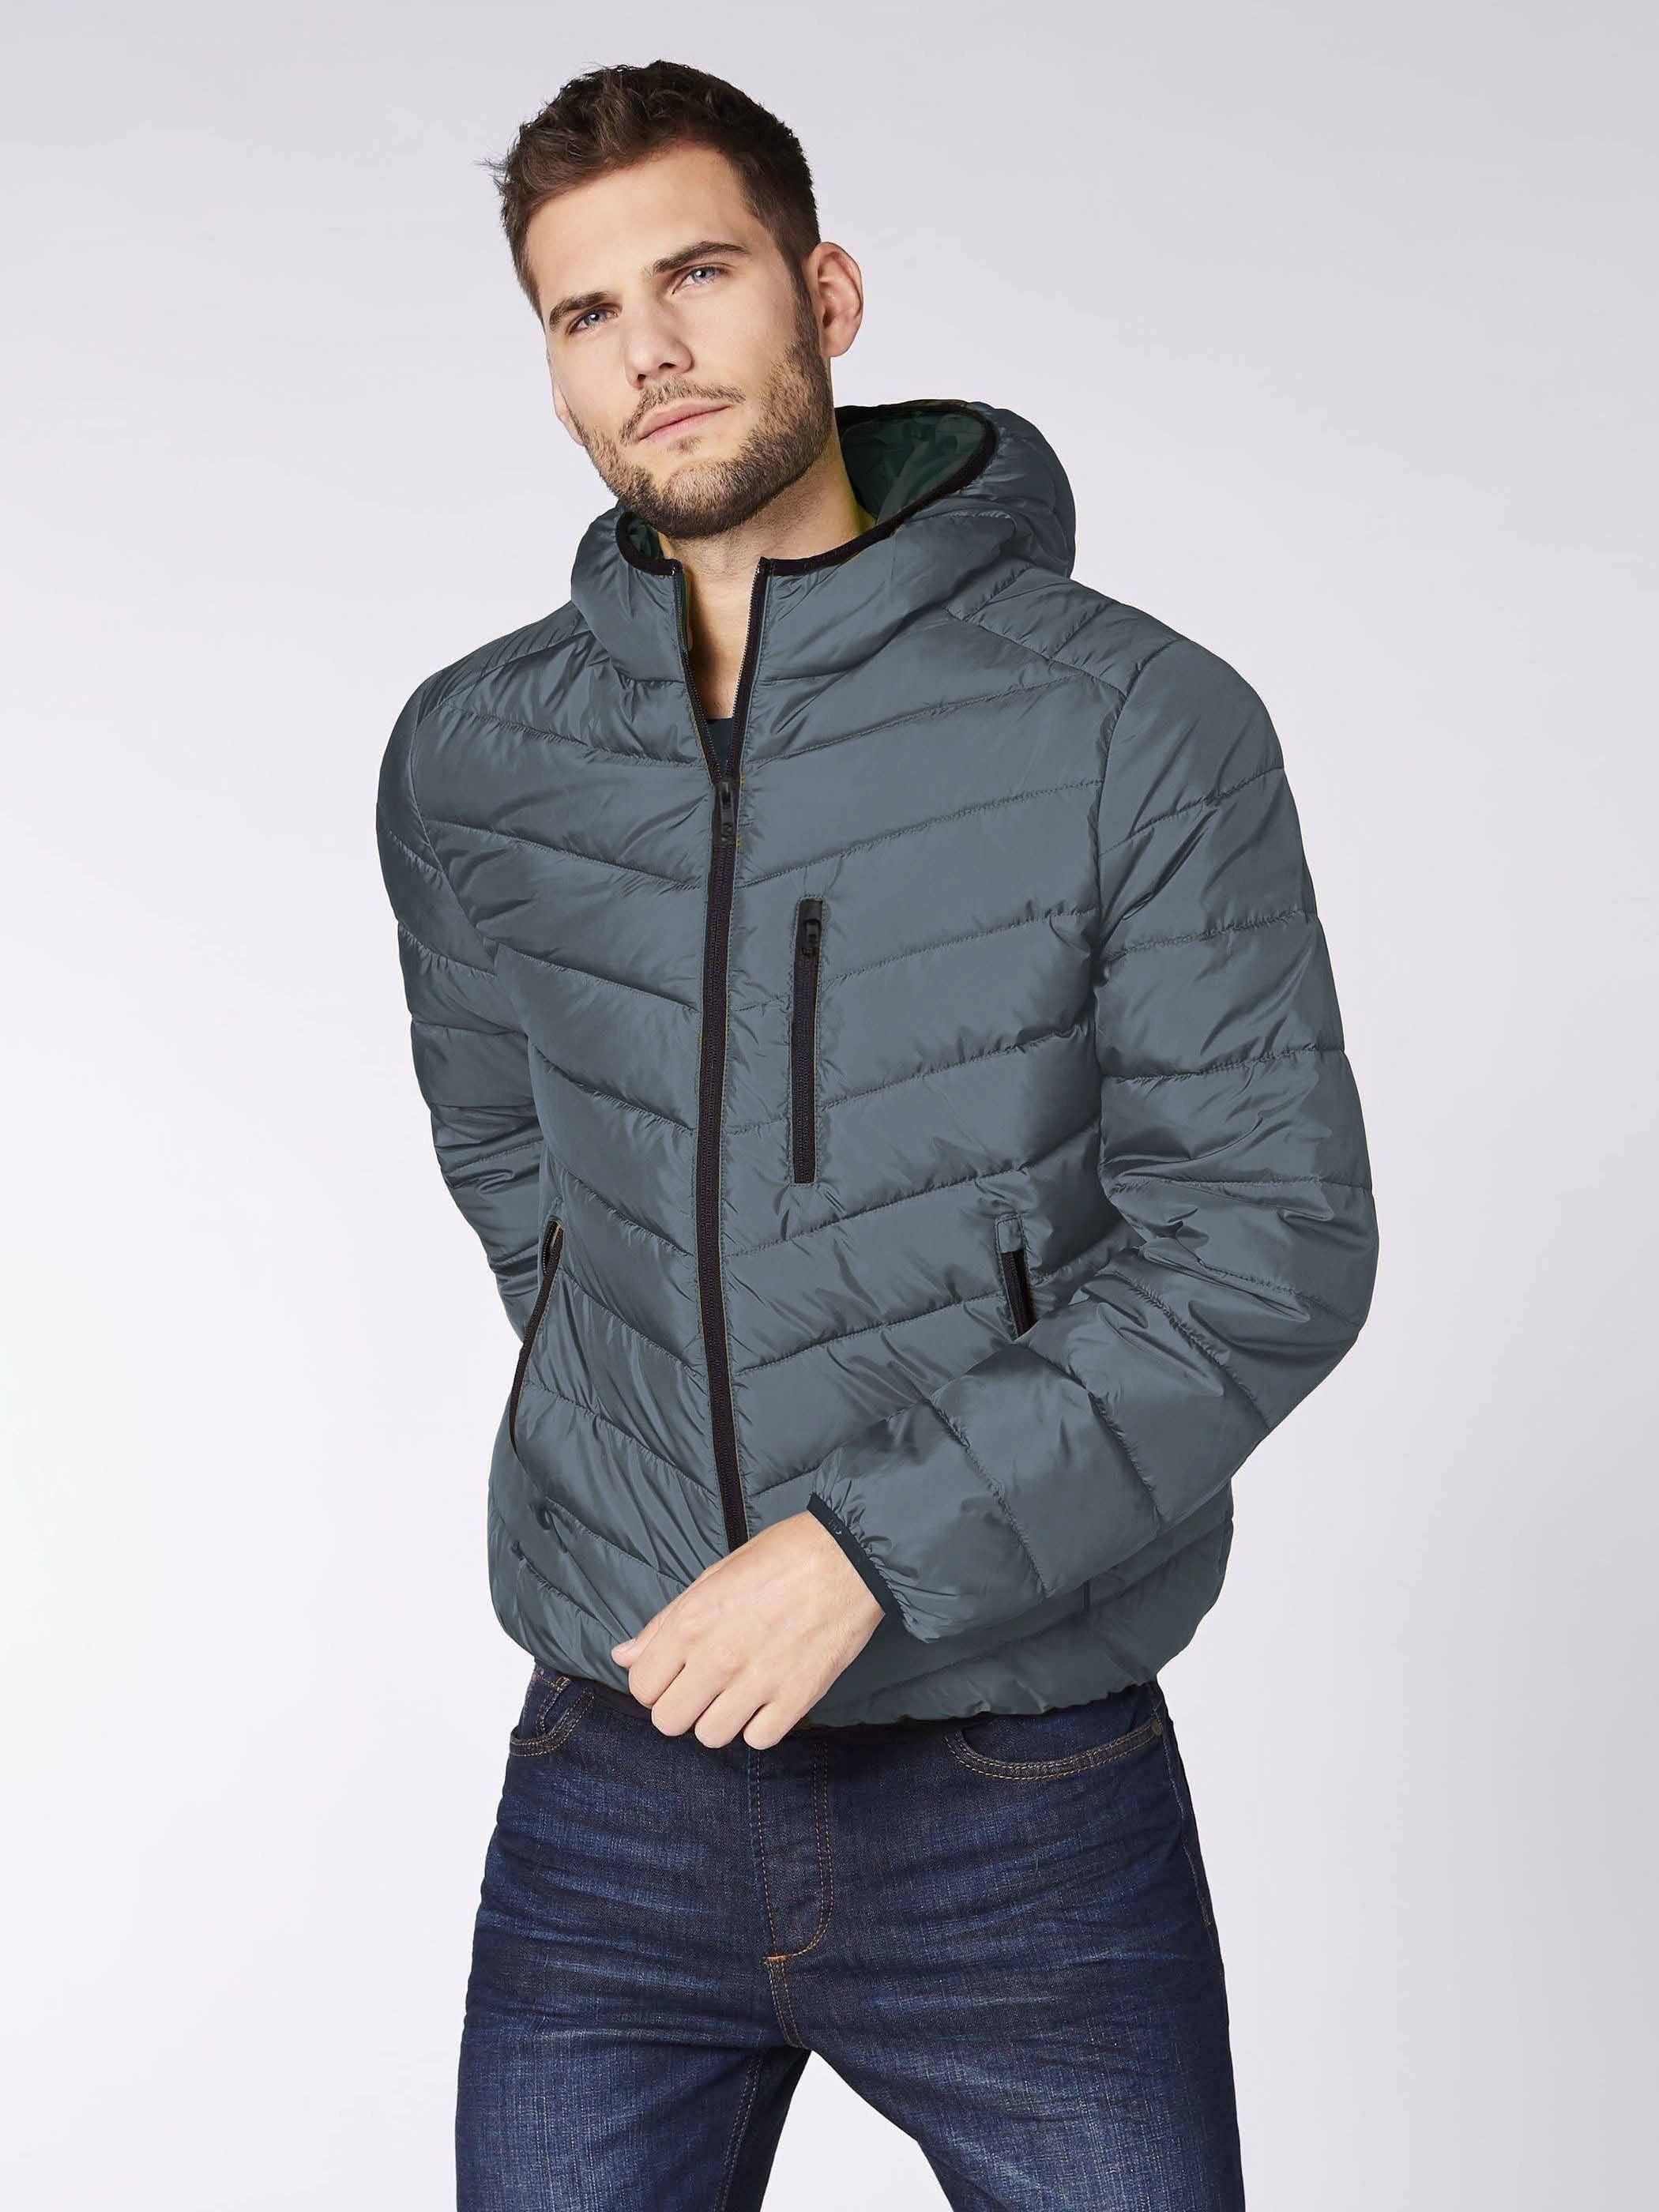 Men's Plus Size Solid Chevron Hooded Puffer Coat, Puffer Jacket, Down Jacket for Winter, Oversized Thick Padded Outwear for Big & Tall Males, Men's